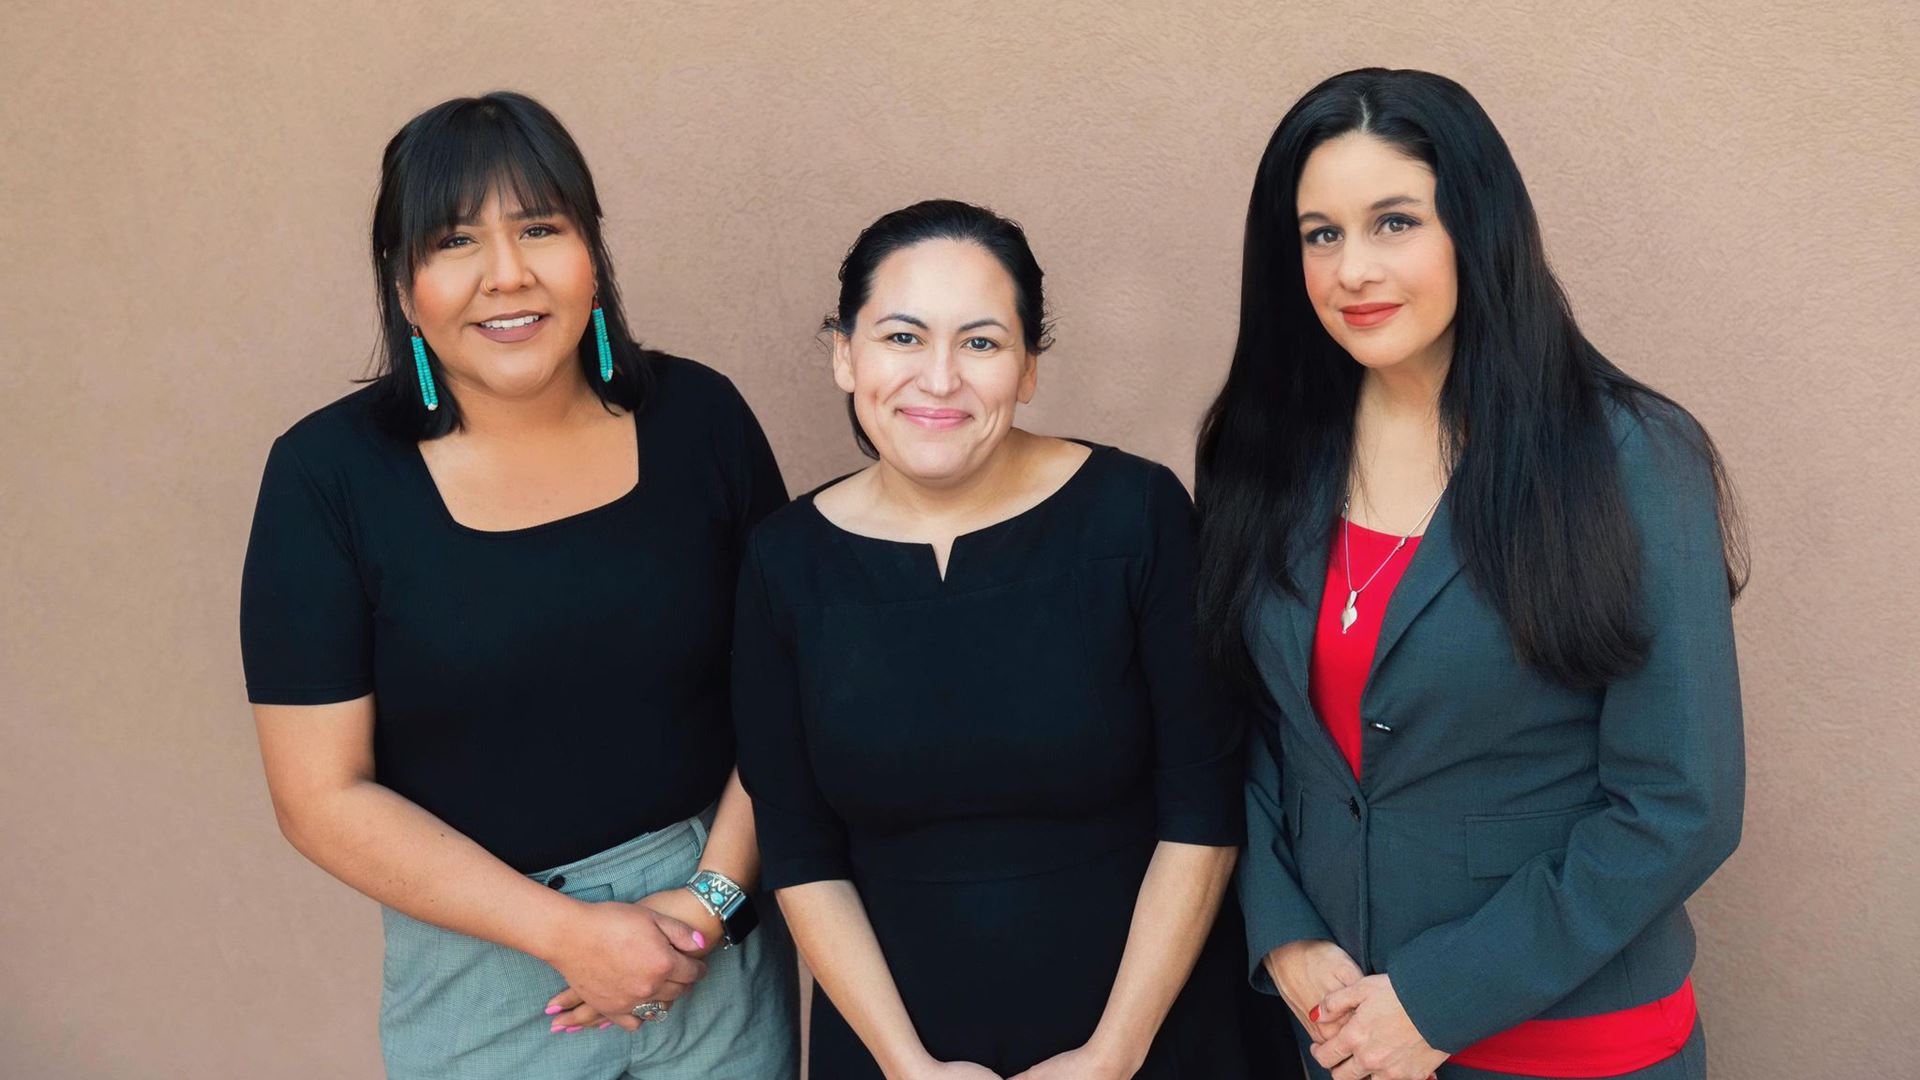 NMSU’s American Indian Business Enterprise receives grant to support student entrepreneurs